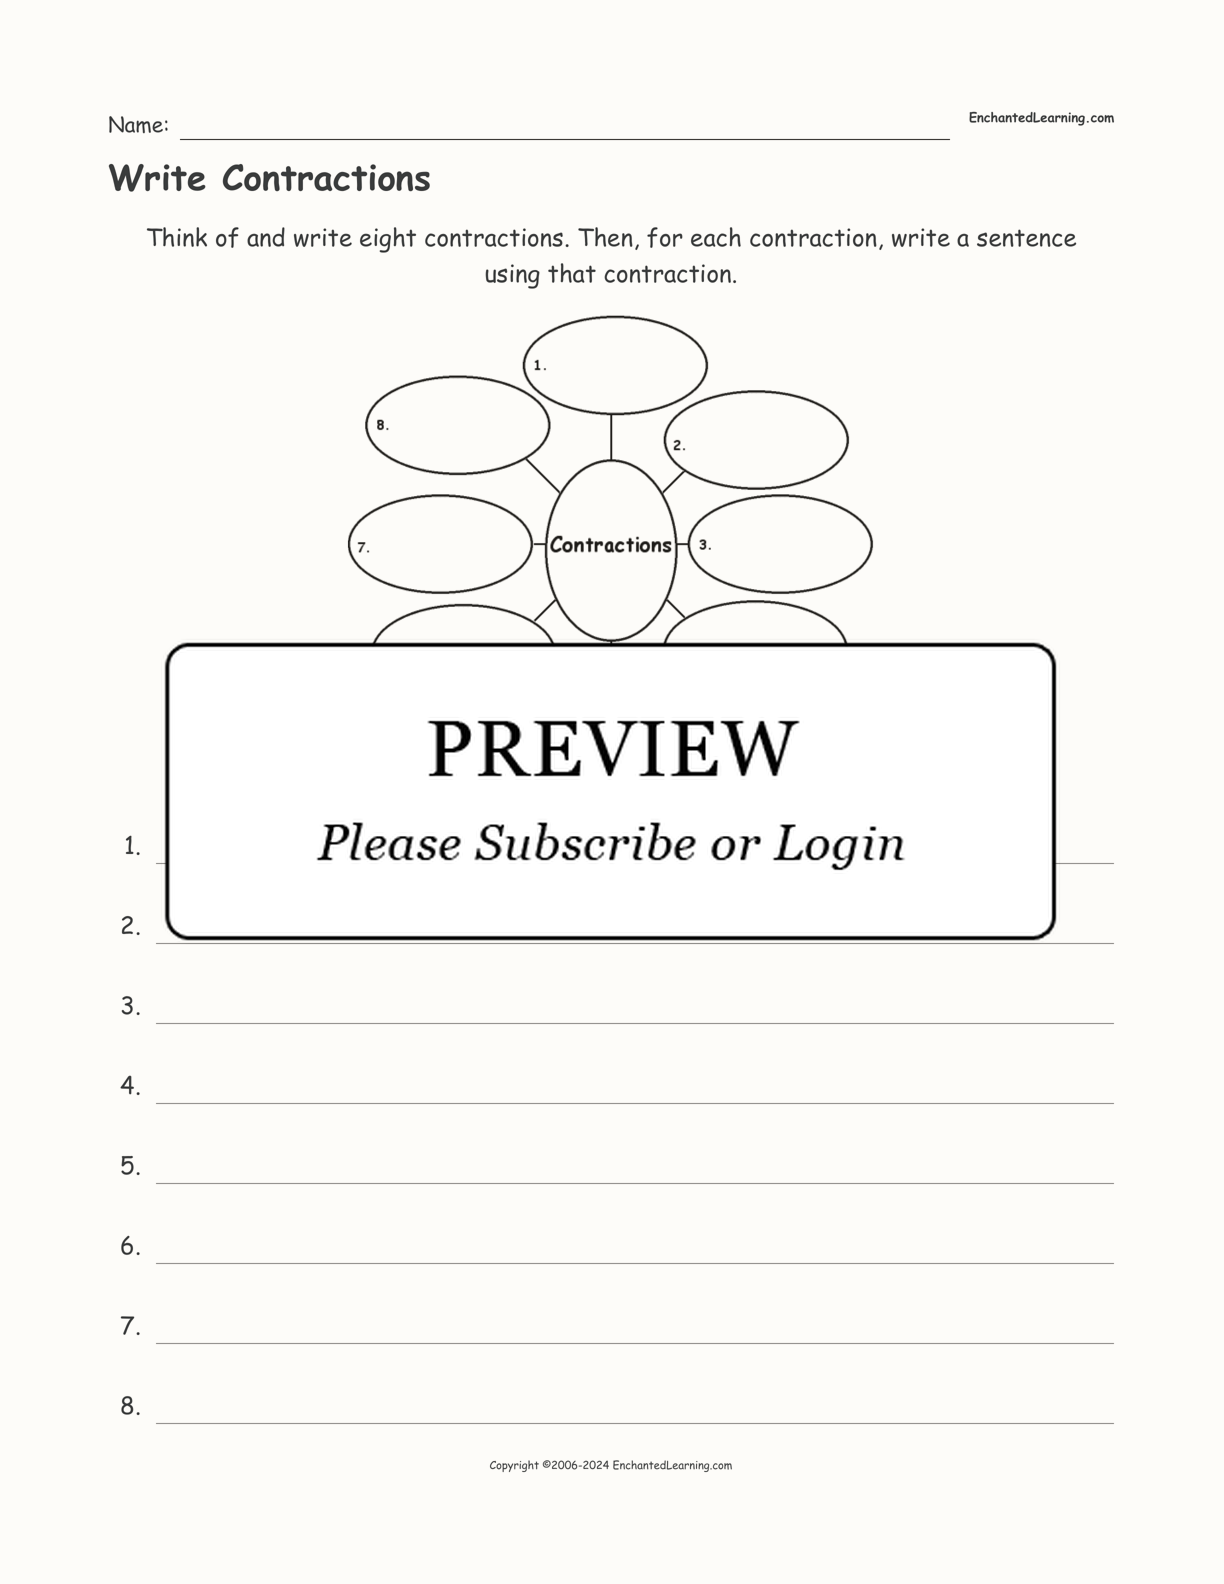 Write Contractions interactive worksheet page 1